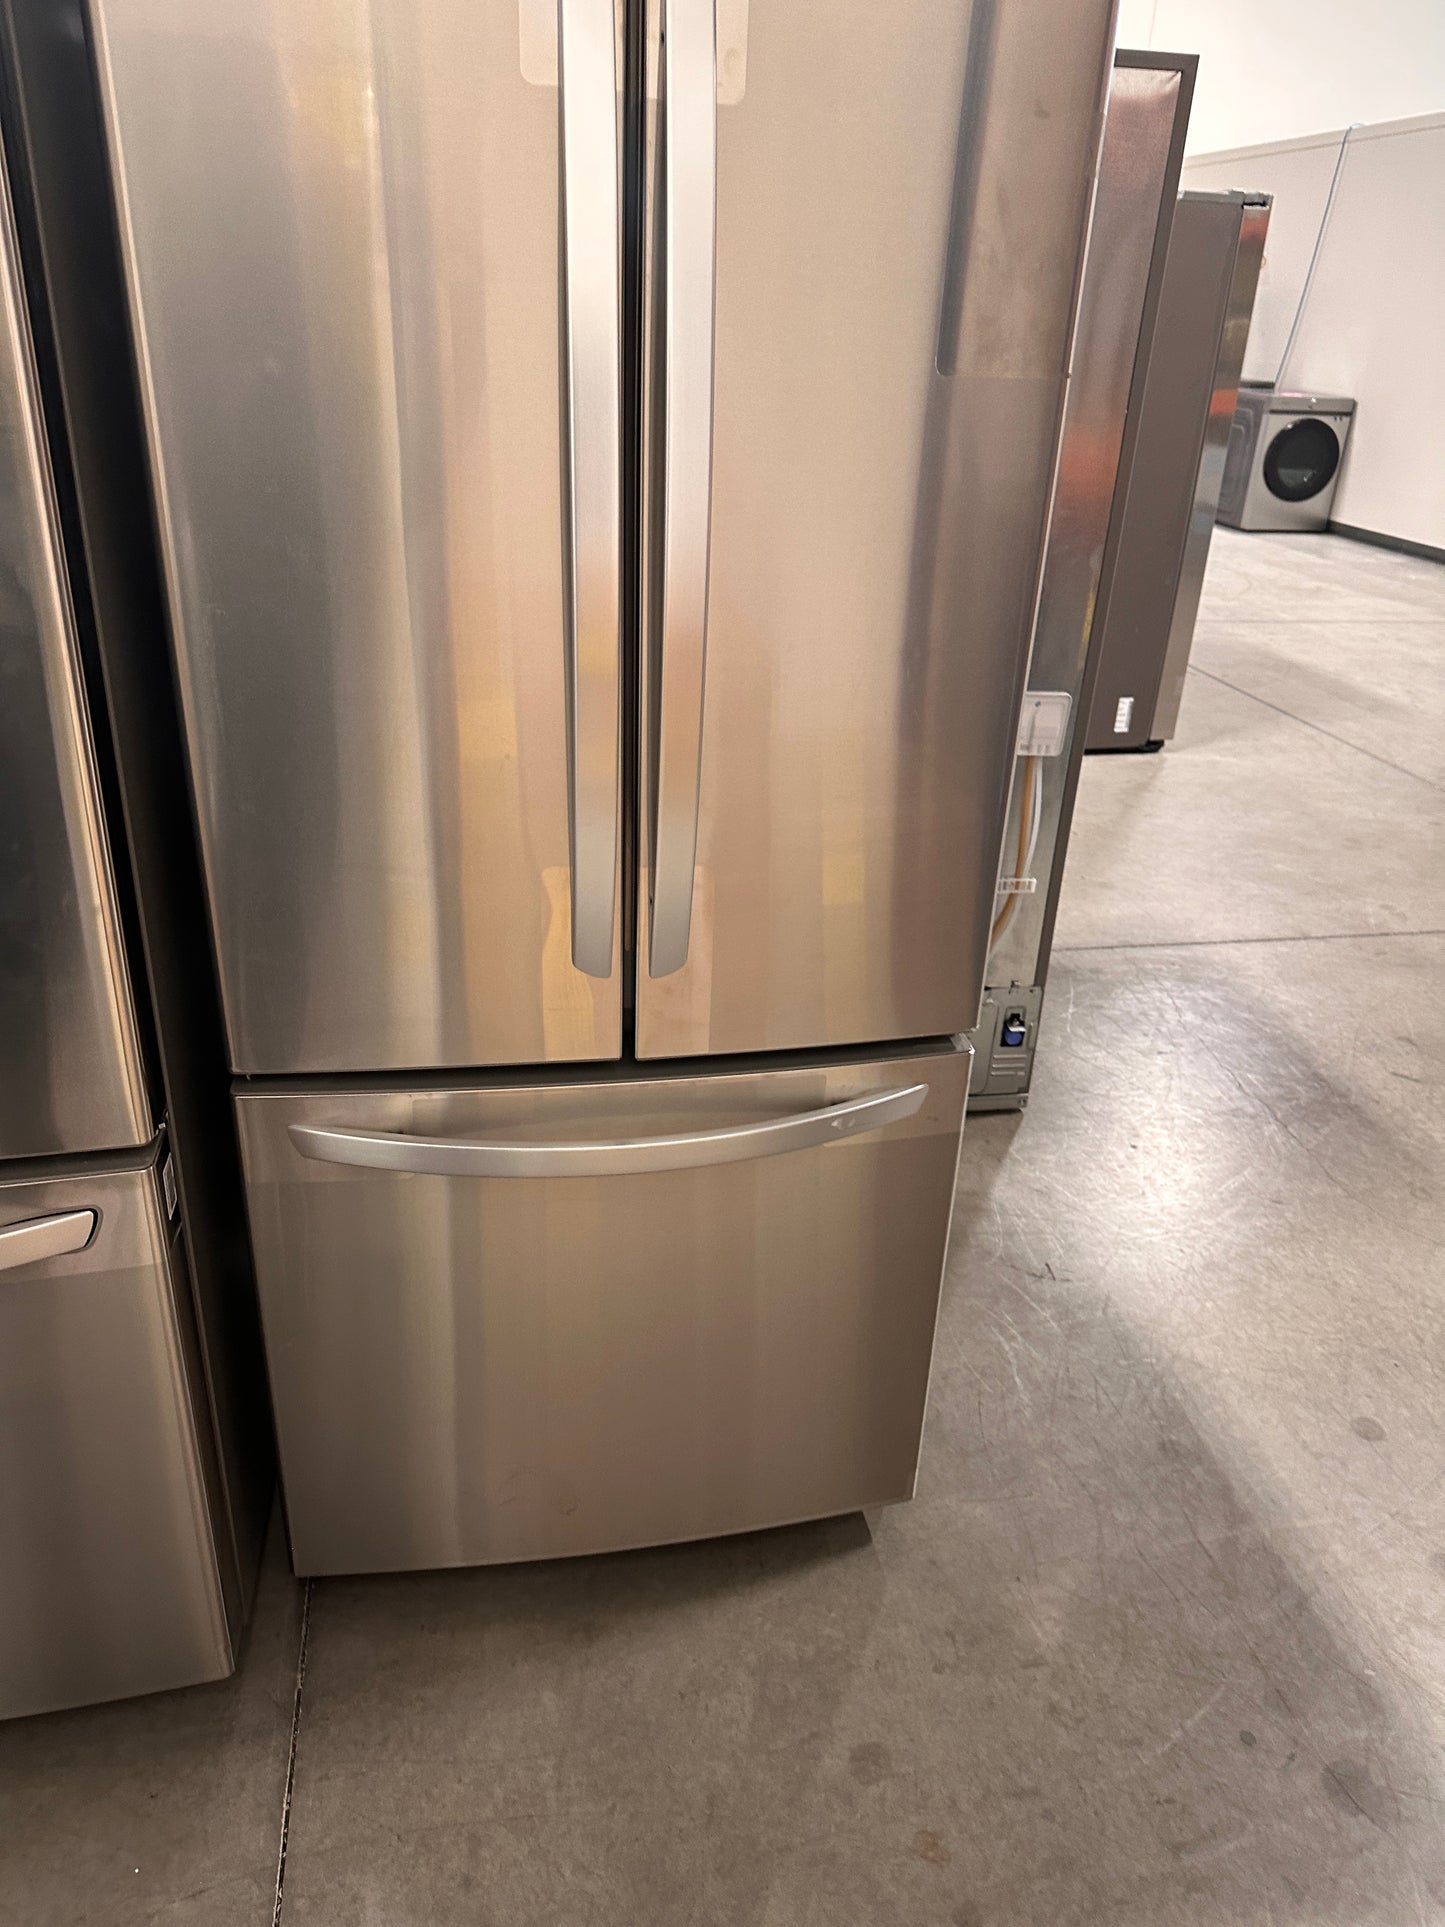 NEW STAINLESS STEEL LG FRENCH DOOR REFRIGERATOR - REF12373 LFCS22520S